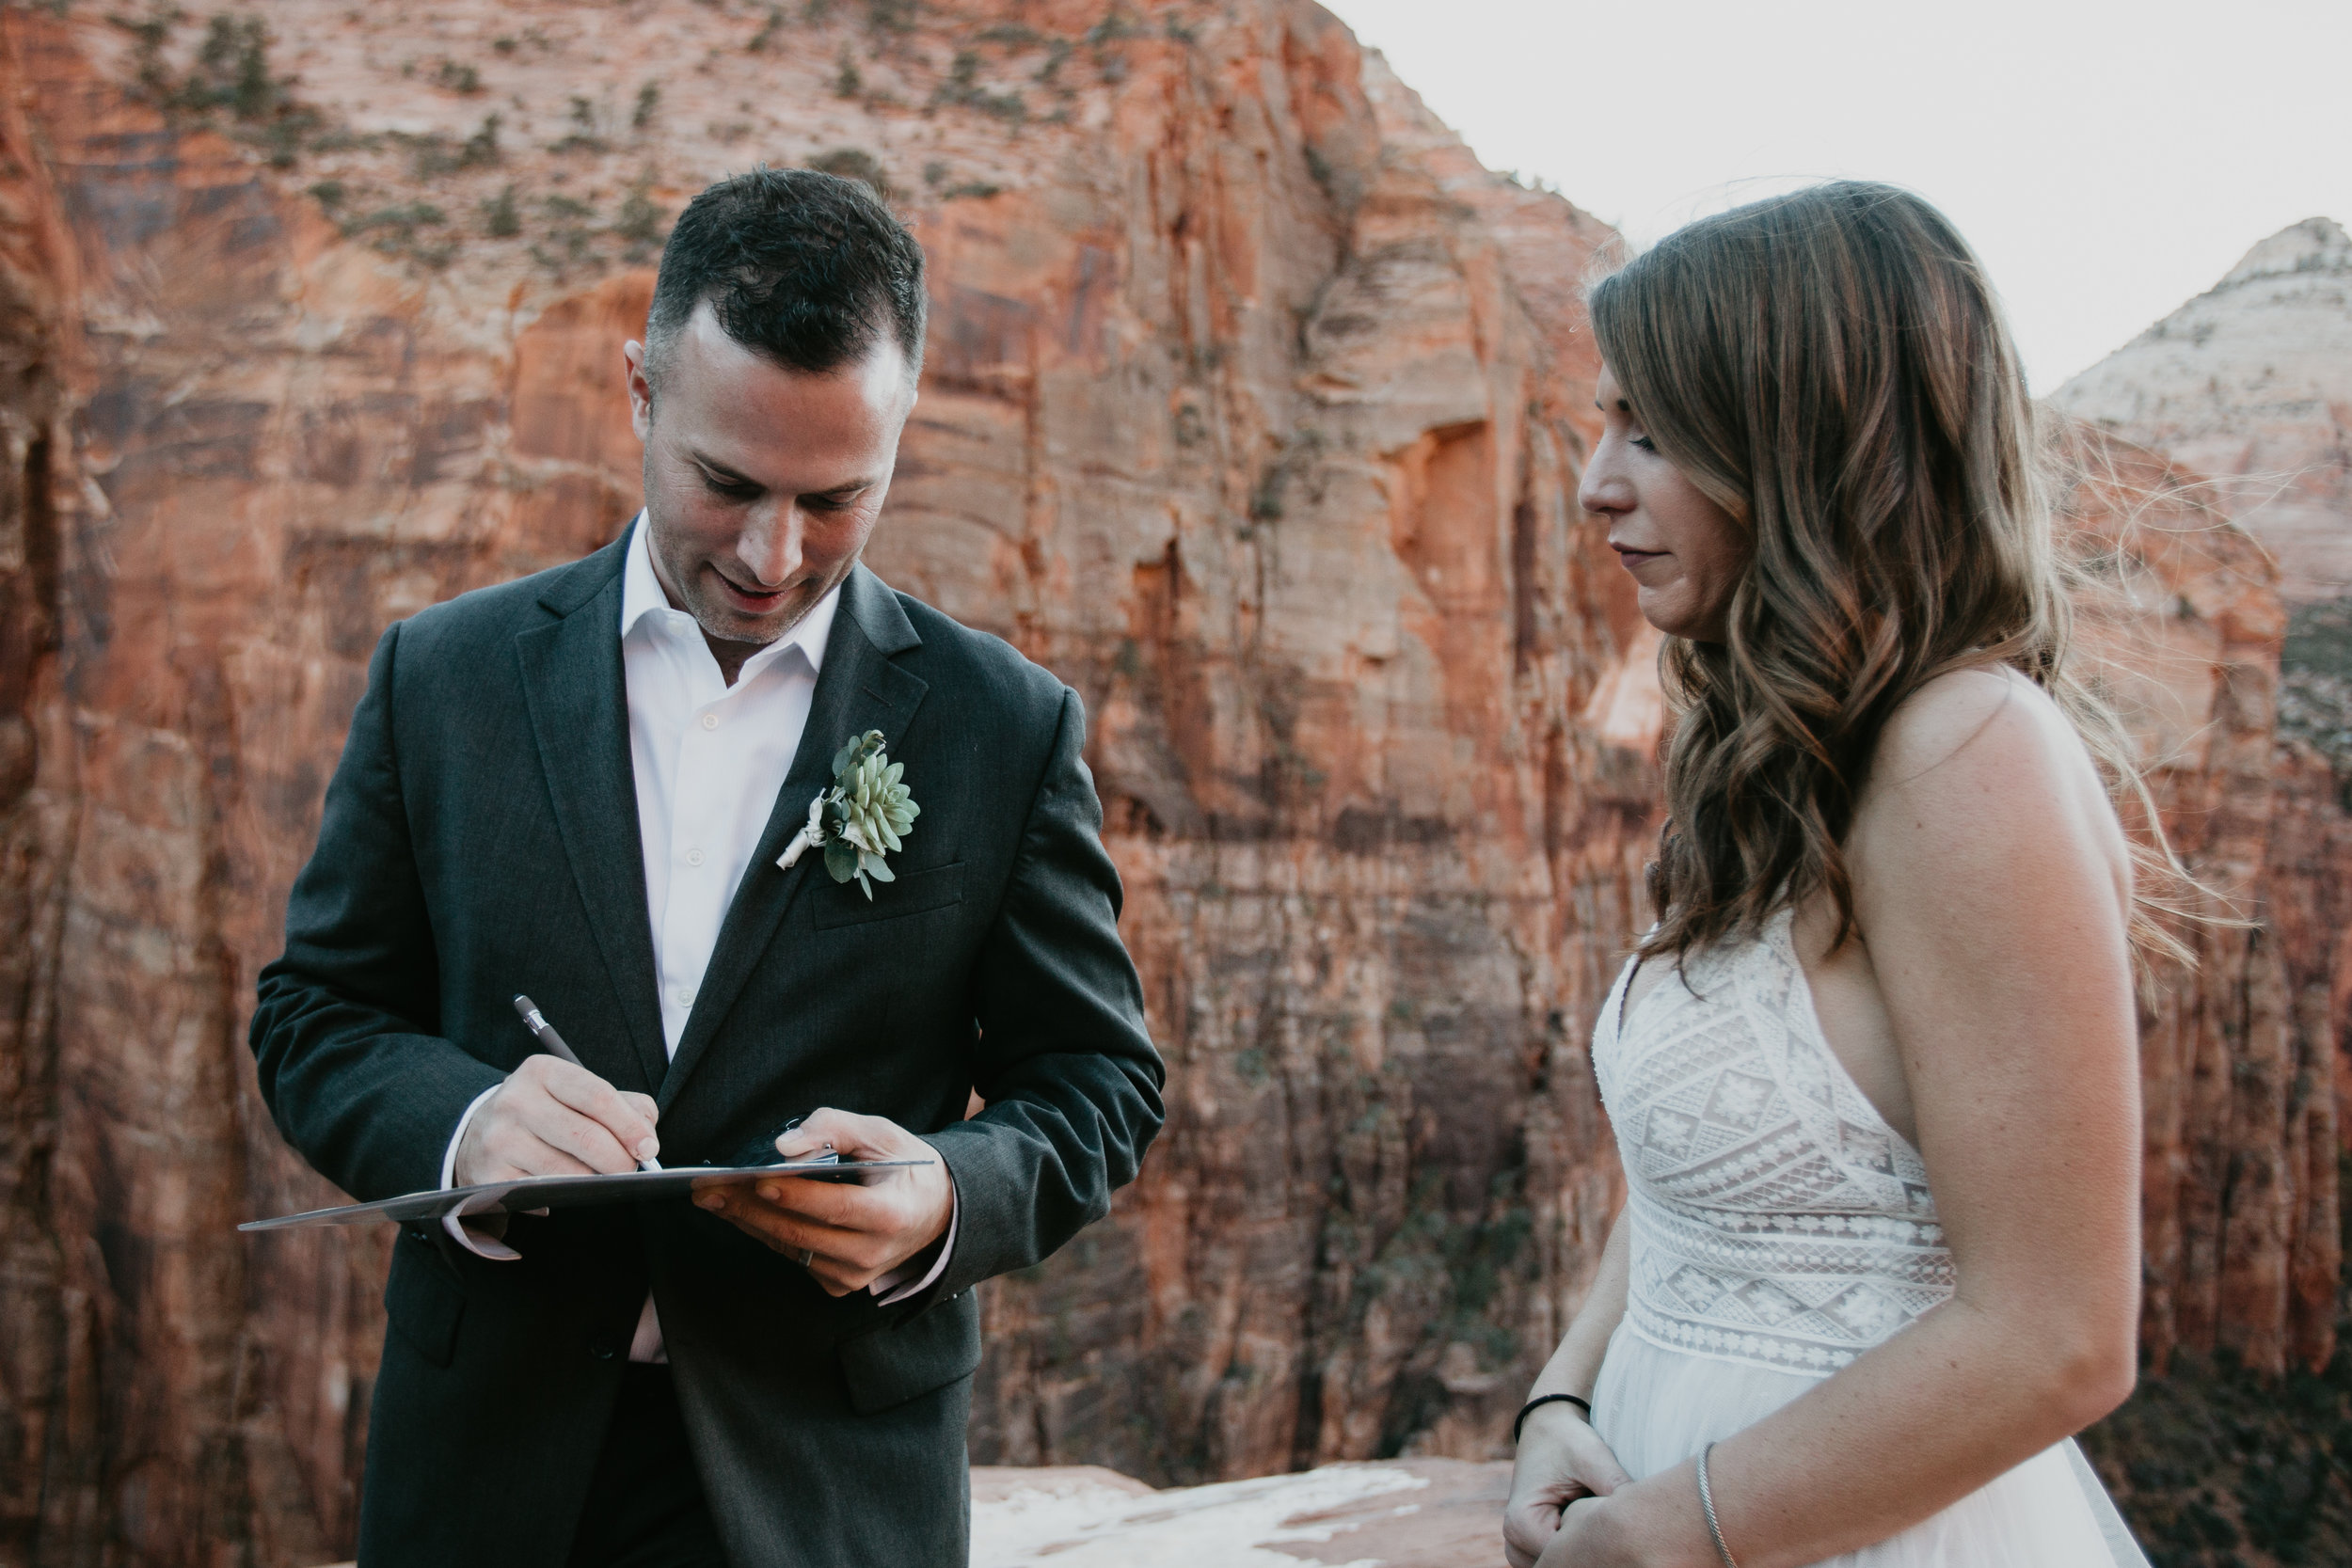 nicole-daacke-photography-zion-national-park-elopement-photographer-canyon-overlook-trail-elope-hiking-adventure-wedding-photos-fall-utah-red-rock-canyon-stgeorge-eloping-photographer-56.jpg